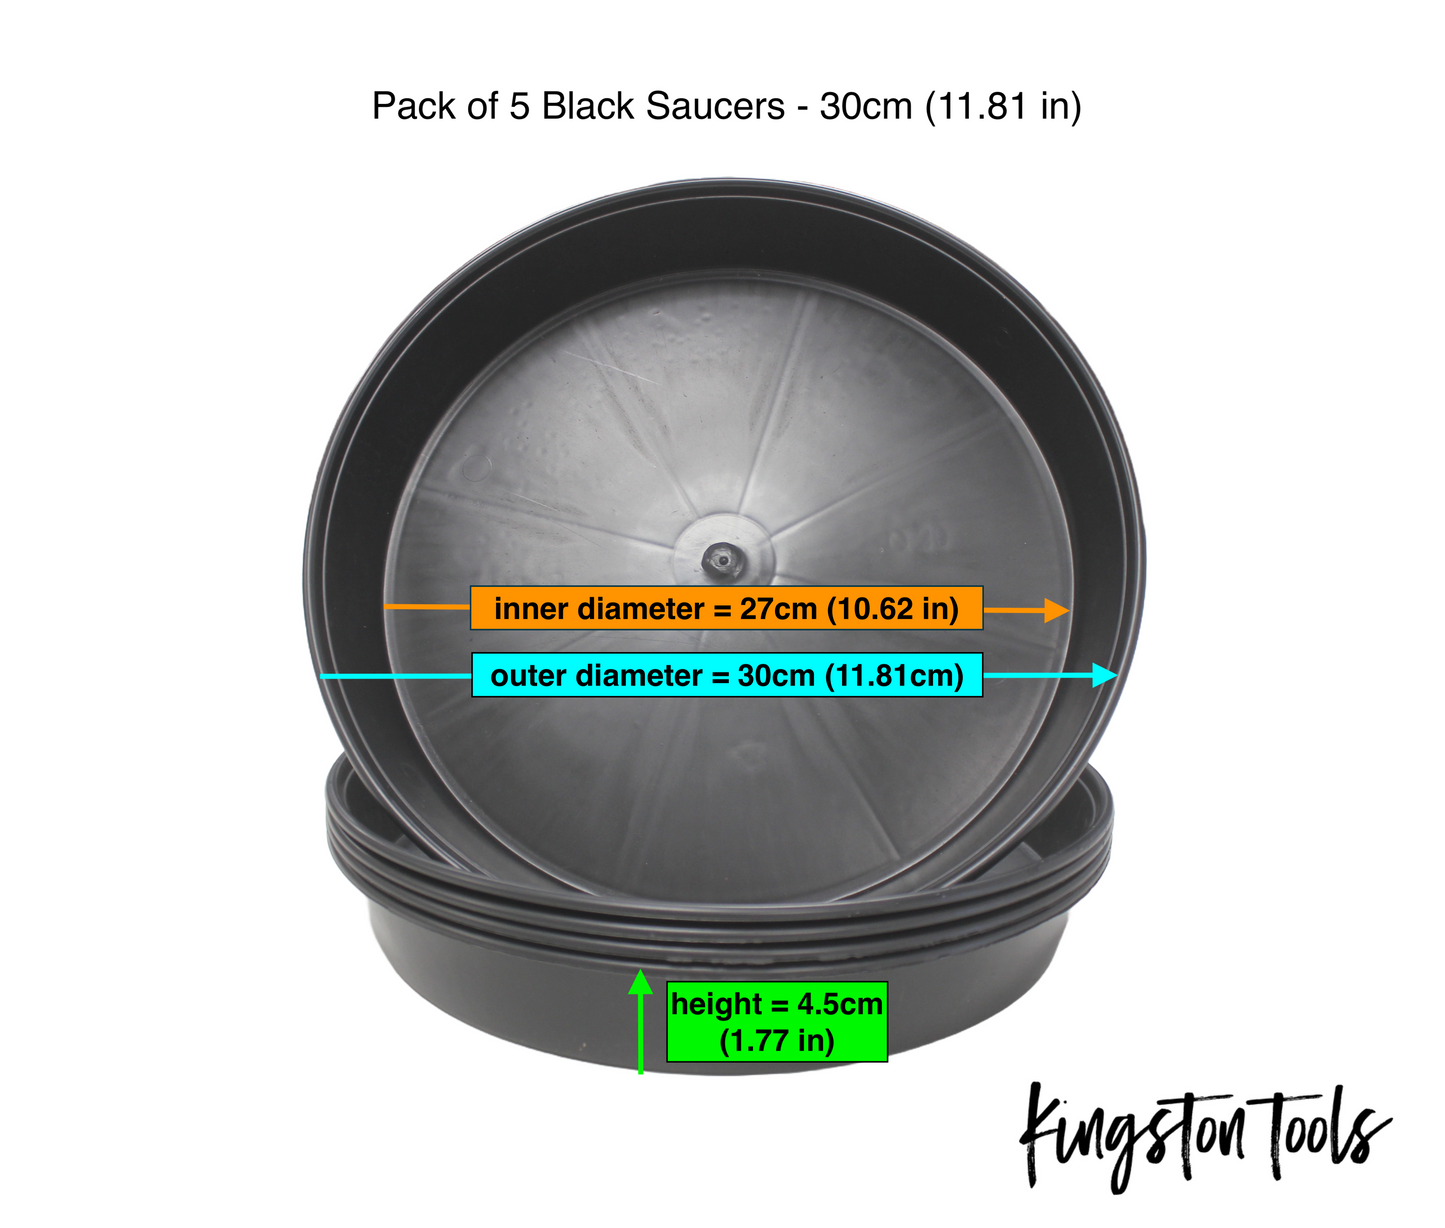 Kingston Tools Pack of 5 Black & Terracotta Plant Pot Saucers Made from Recycled Plastic Strong and Sturdy Drip Tray 6 sizes Available: 18cm, 20cm, 25cm, 30cm, 40cm, 50cm